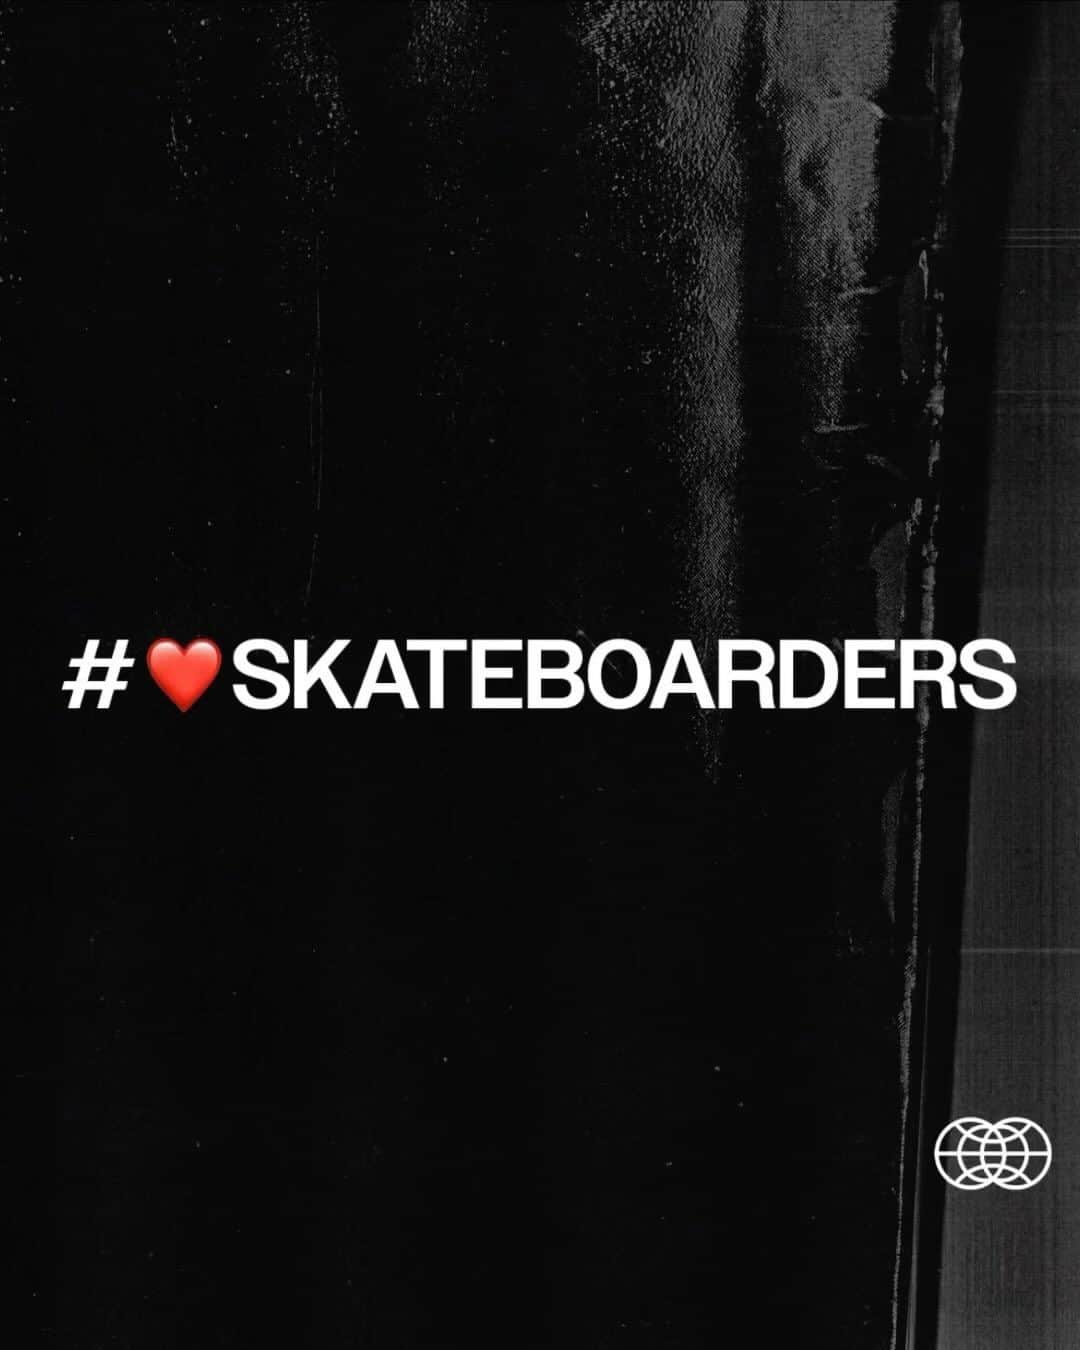 The Berricsのインスタグラム：「Every day we’re going to look at  #❤️skateboarders and pull what we see and feature them on our page, no matter who they are, what they’re doing or what level of skateboarding they’re at, because we love you, appreciate you, and you’re important to the survival of skateboarding as a whole, even if you don’t know it yet. - sb   1) @yuhi_sgsk - Do a Kickflip!! 👏   2) @p.miko_skate - Late back foot heelflip bs boardslide 🤯   3) @tammy_tamio - Street Edit 🔥   4) @kleberfabianoskt - Park Edit 💪   5) @skater_girl_dani - Drop-Ins with Dad. 🤝   #❤️skateboarders #berrics #skateboardingisfun」